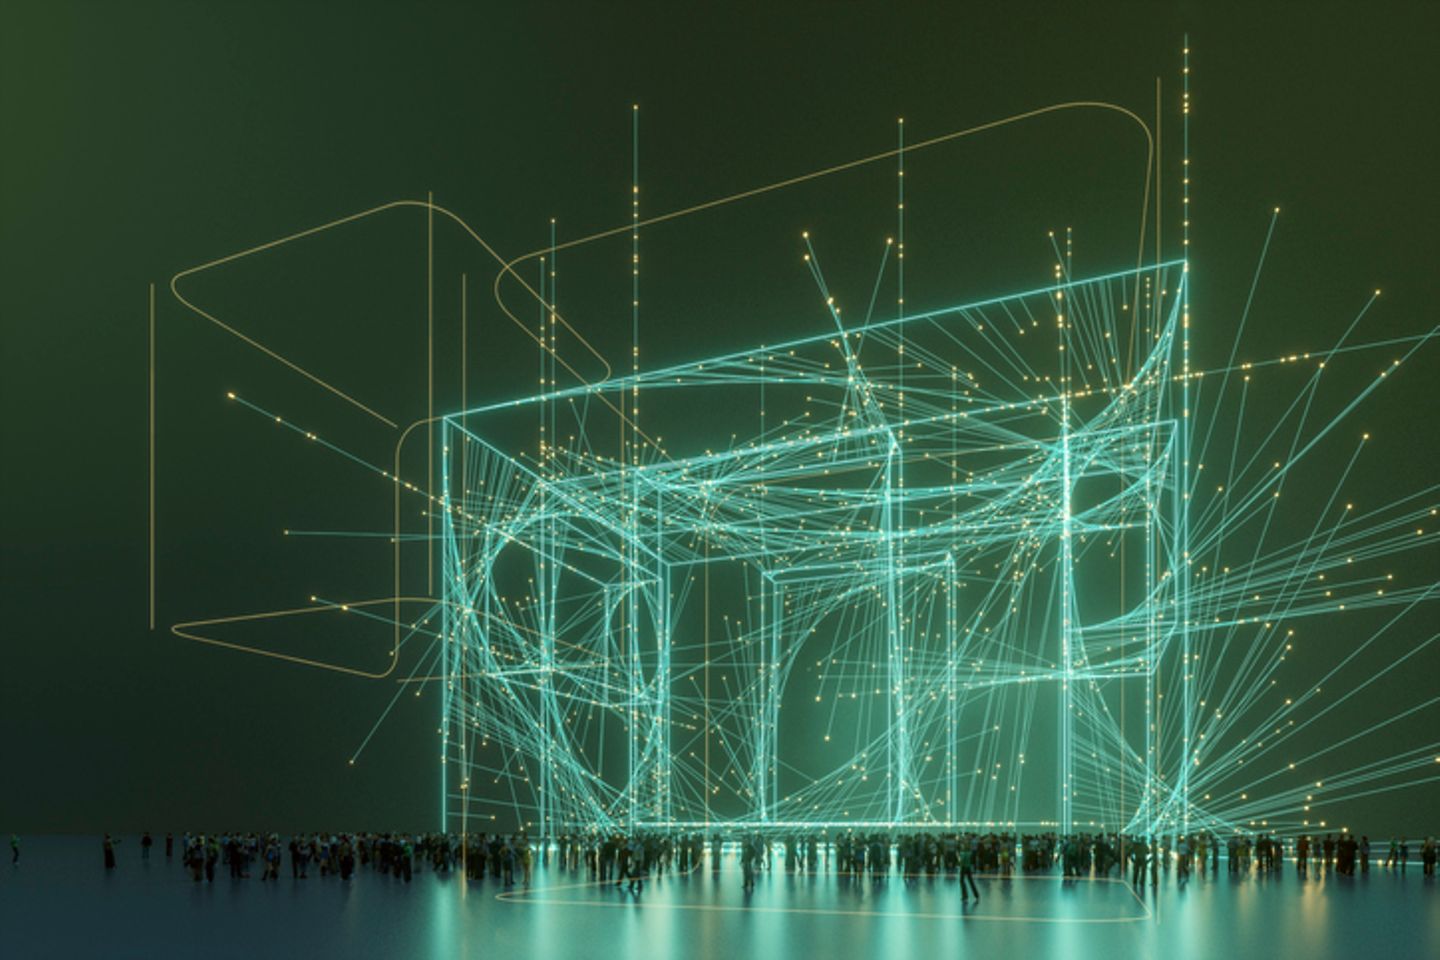 Virtual representation of jumbled lines above a crowd of people.